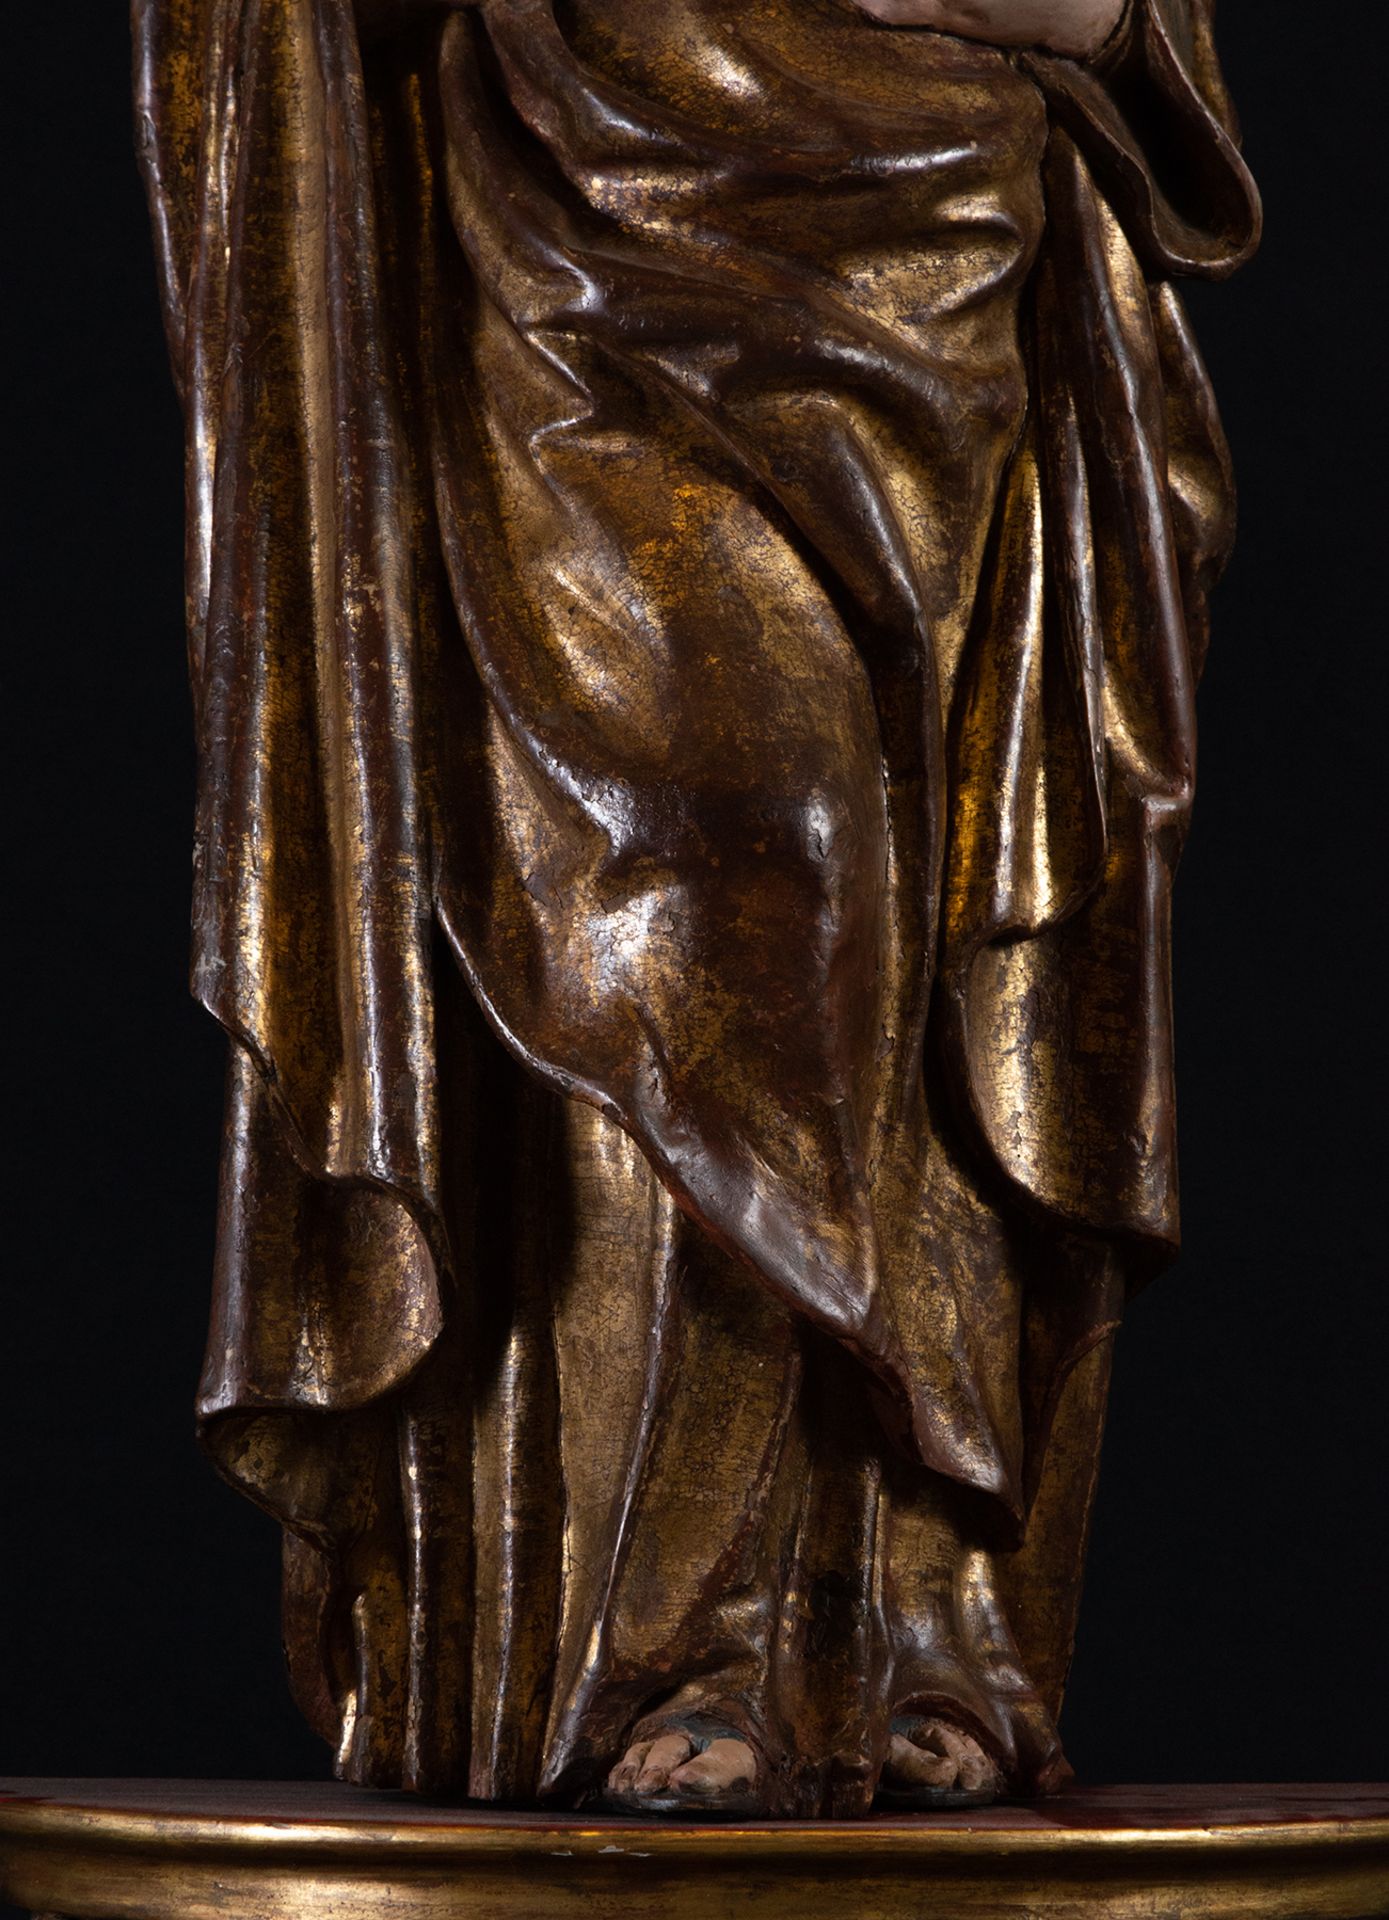 Spectacular Large Virgin with Child in her arms in wood carving, Romanist school of the 16th century - Image 3 of 9